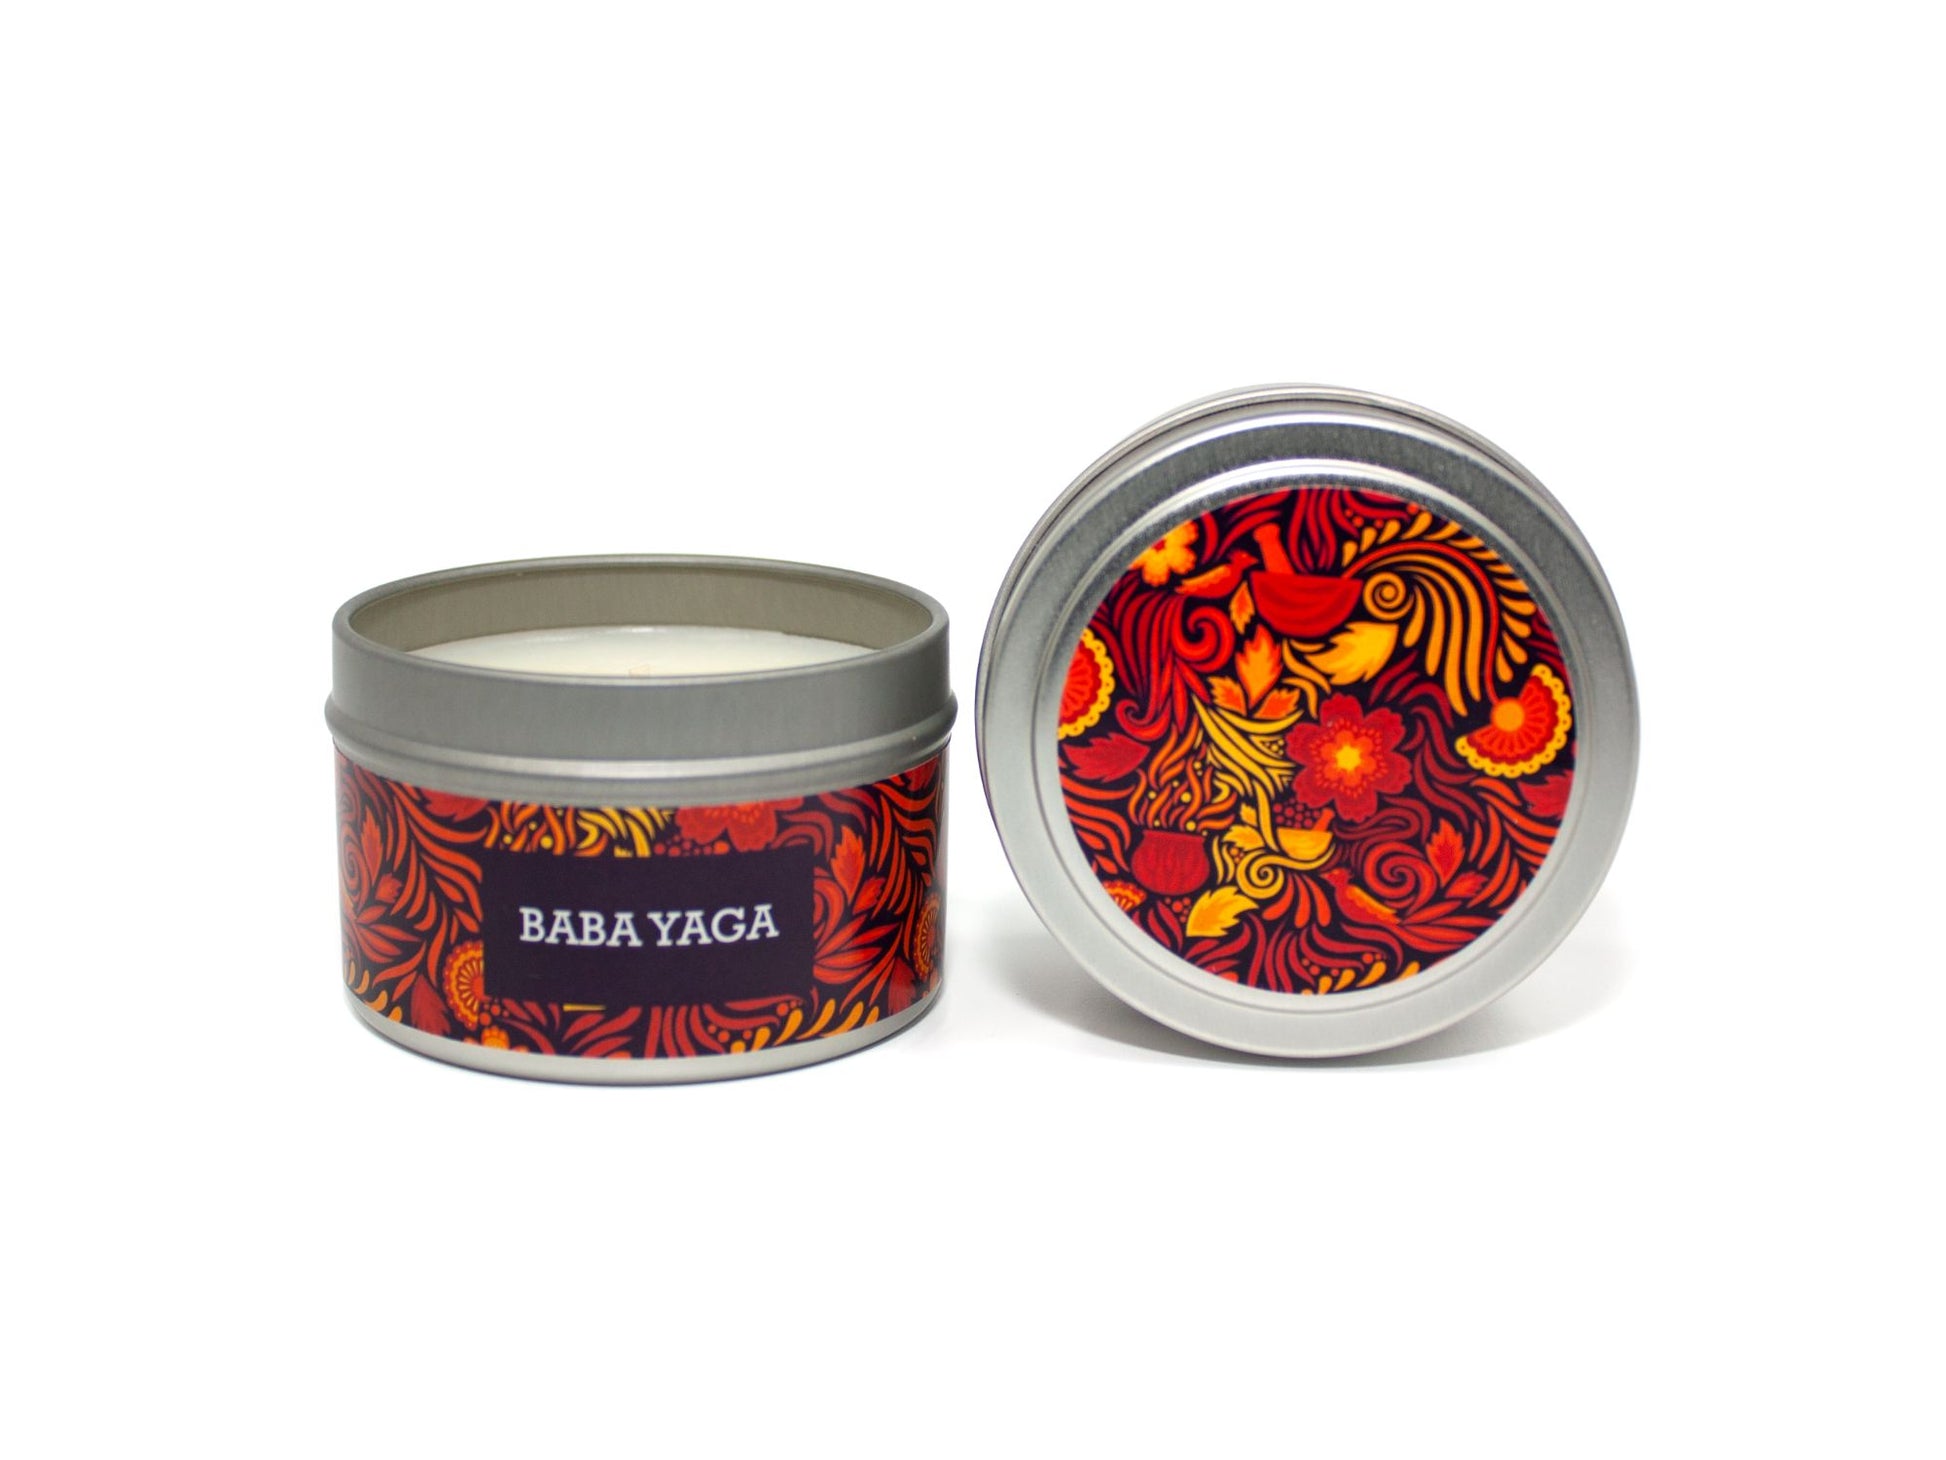 Onset & Rime spiced smoke scented candle called "Baba Yaga" in a 4 oz silver tin. The circular label on top is purple-black with a bright red pattern of flames, swirls and flowers. The text on the front label is "Baba Yaga - Myrrh, Warm Spices, Smoke".